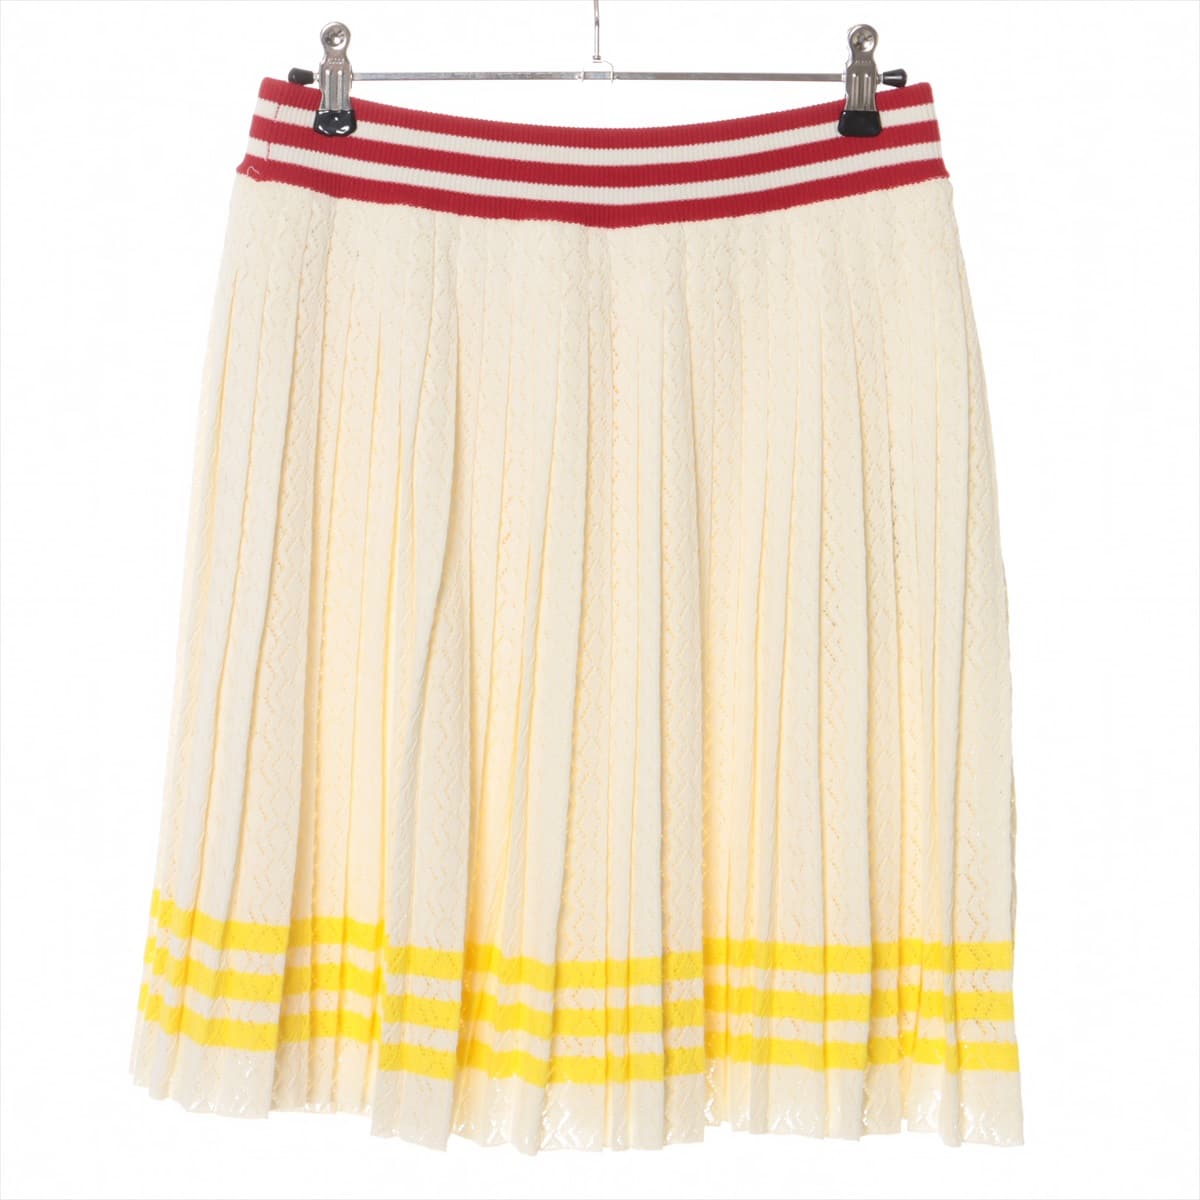 Gucci x adidas Cotton & silk Skirt M Ladies' White  702874 Comes with petticoat